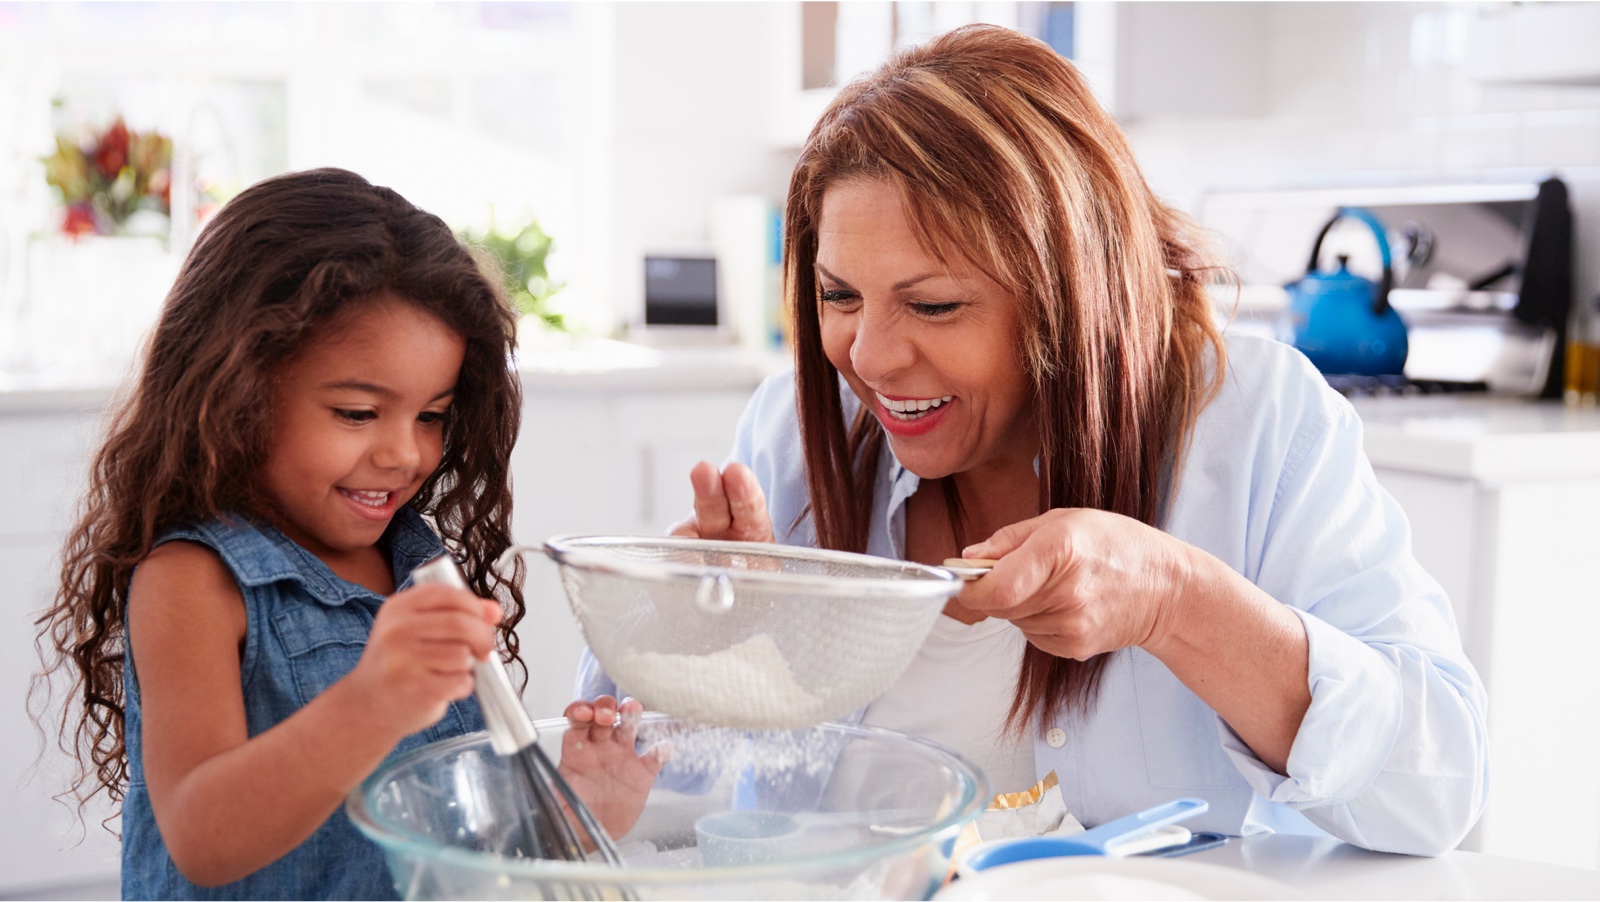 A picture of a grandma and granddaughter baking in a kitchen